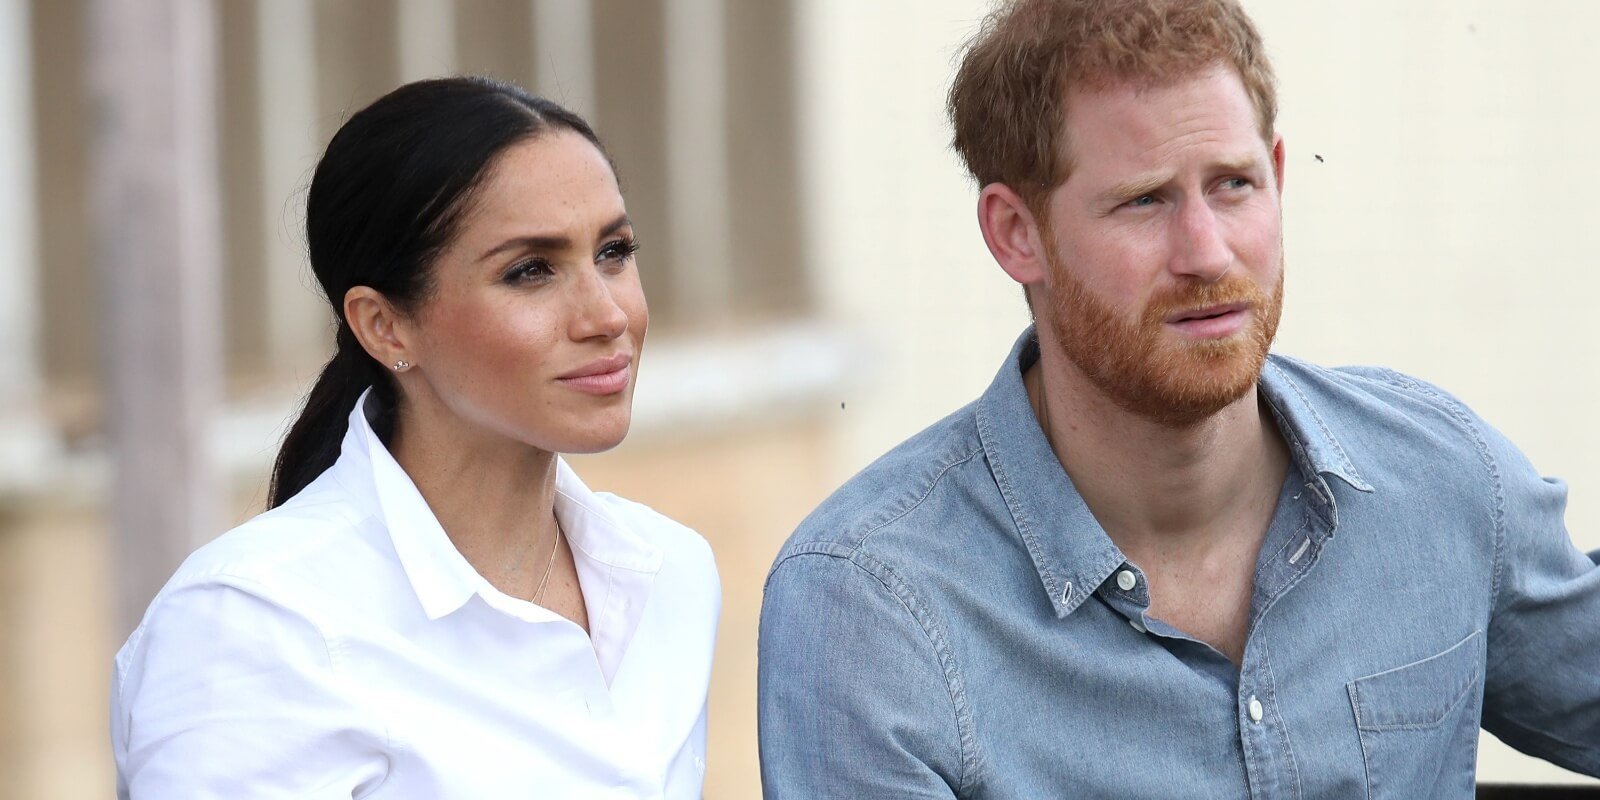 Meghan Markle and Prince Harry moved to the United States in March of 2020.